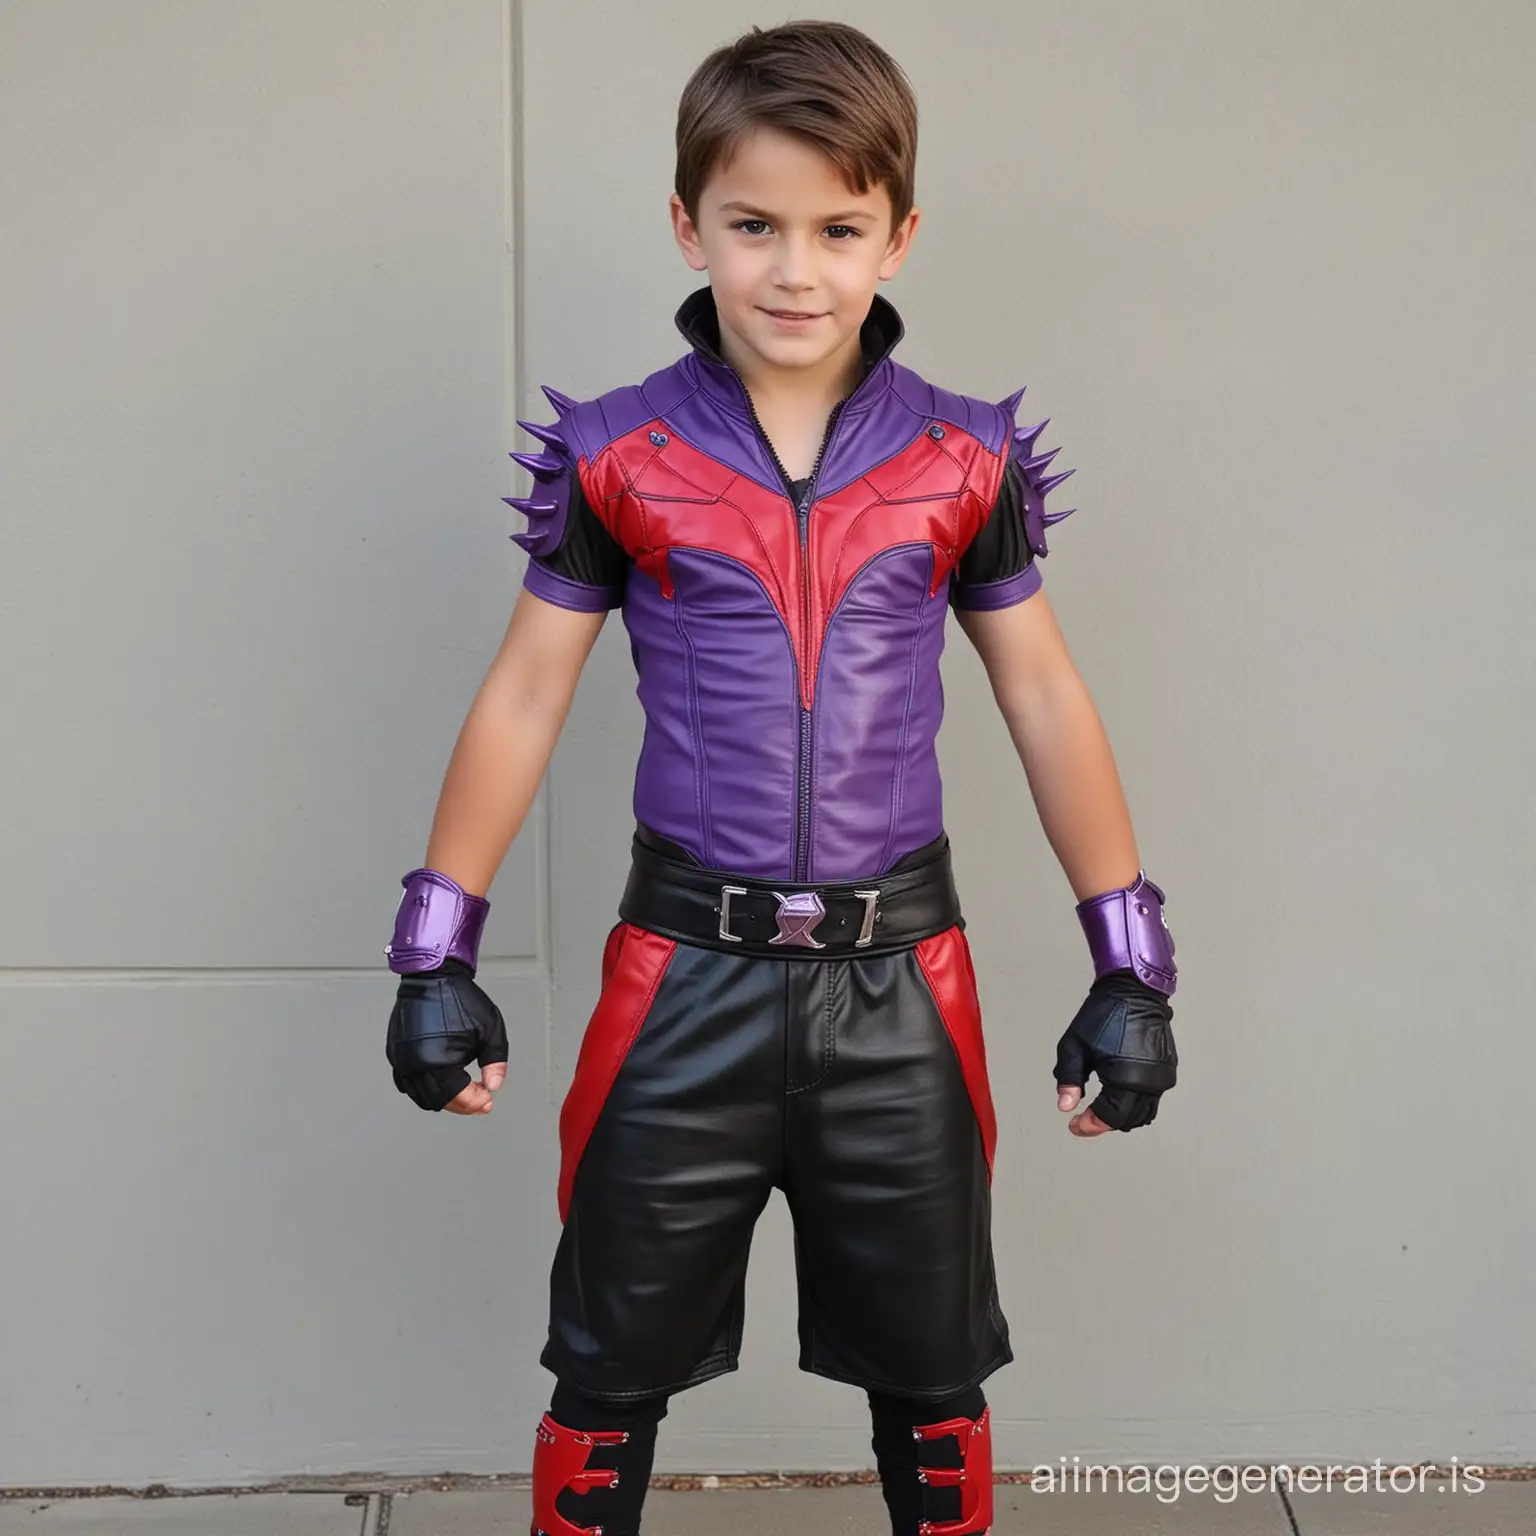 Fit-8YearOld-Boy-Villain-in-Intimidating-Leather-Outfit-with-Purple-and-Red-Shades